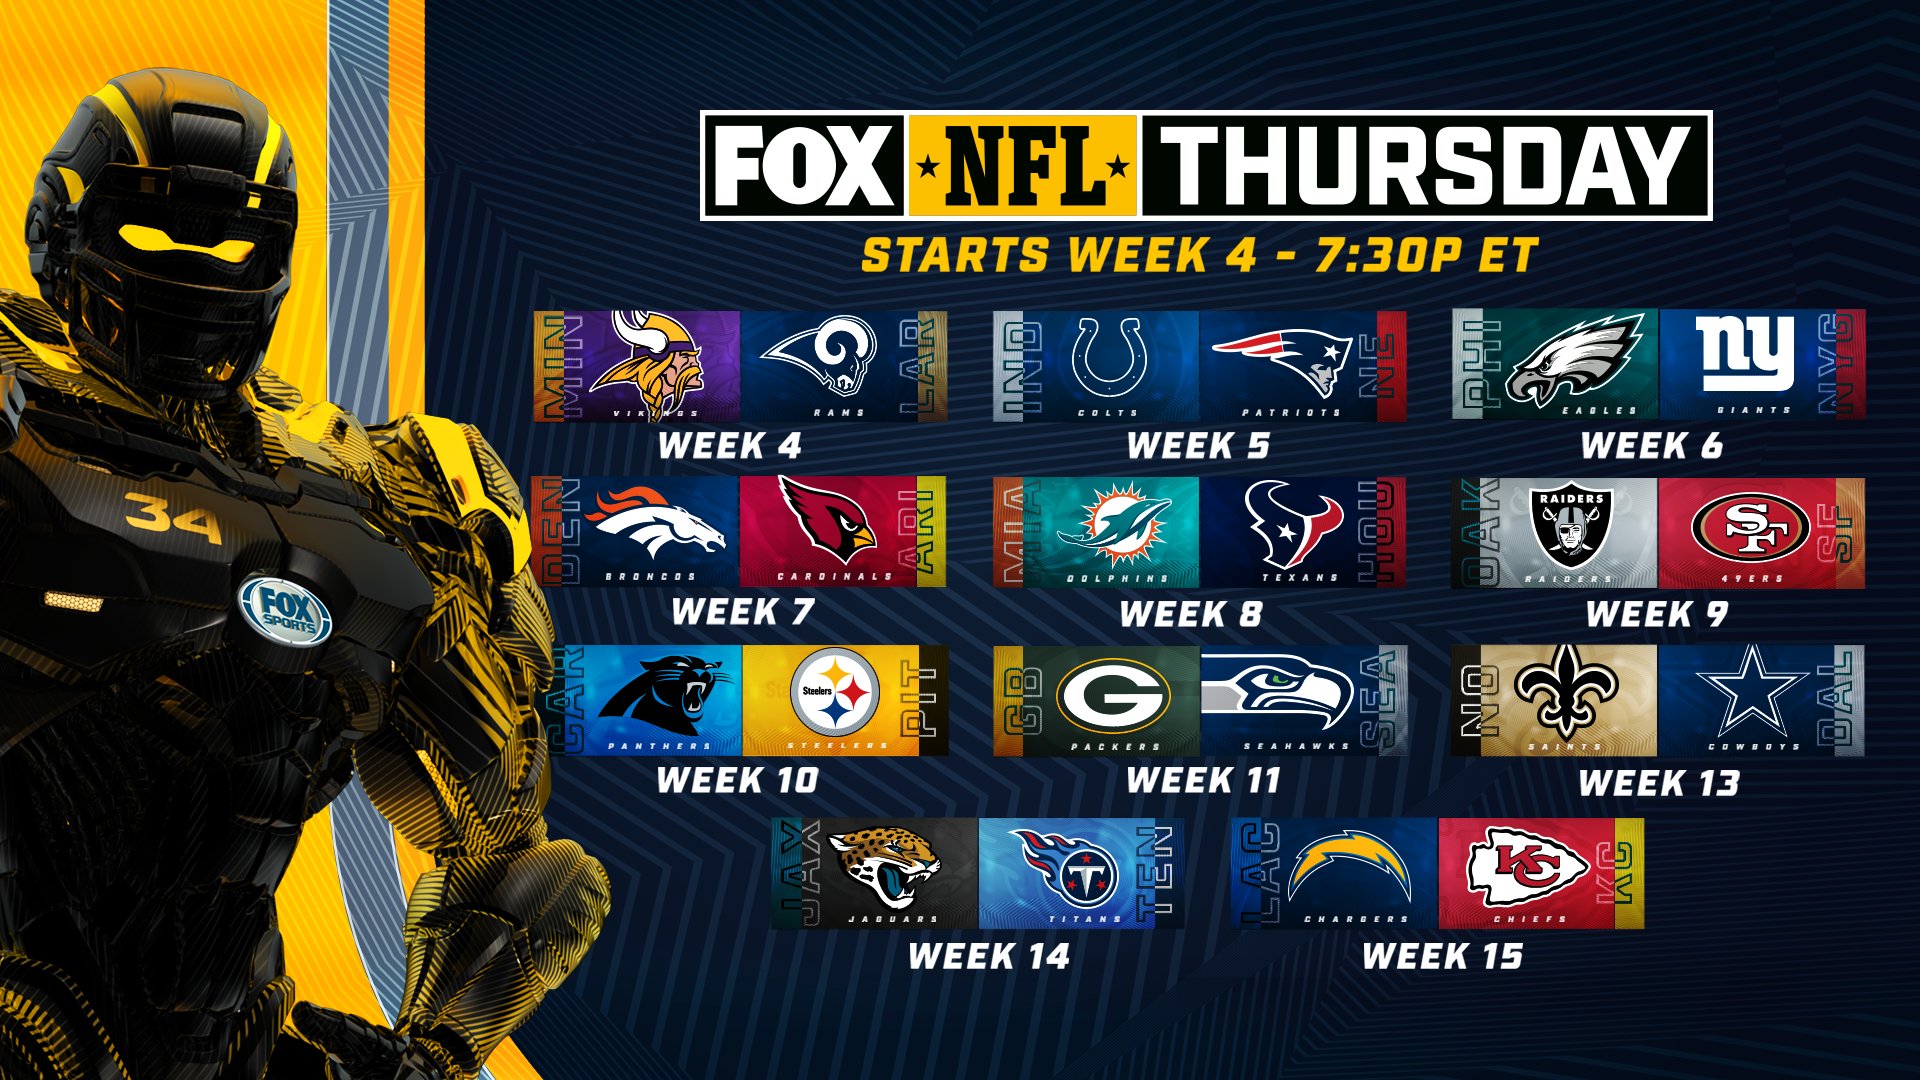 FOX Sports on X: This could be the best Thursday night schedule ever! Thursday  Night Football is coming to FOX starting in Week 4. What game are you most  excited for this